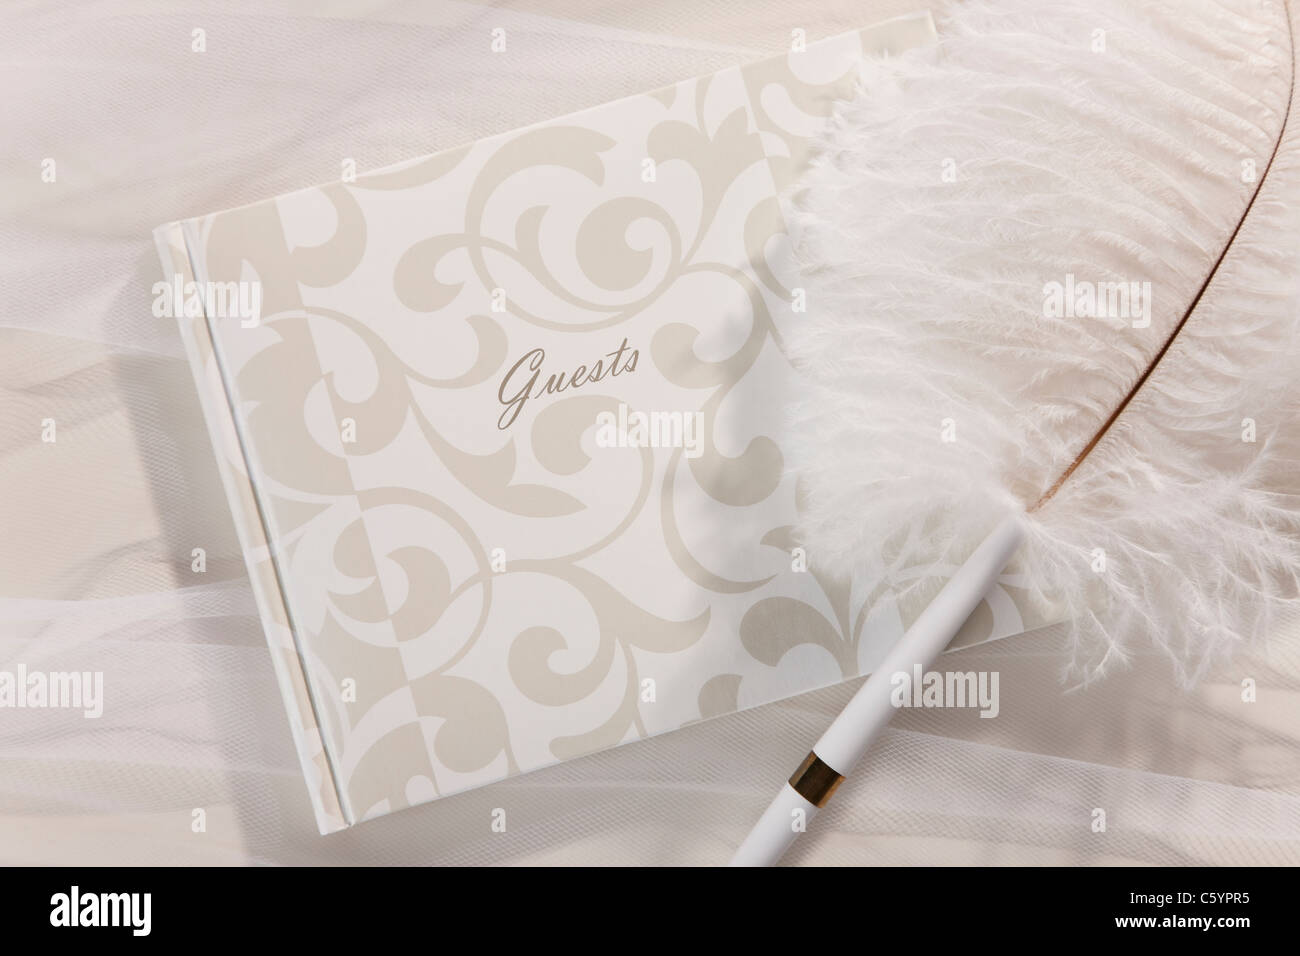 Pen by guest book Stock Photo